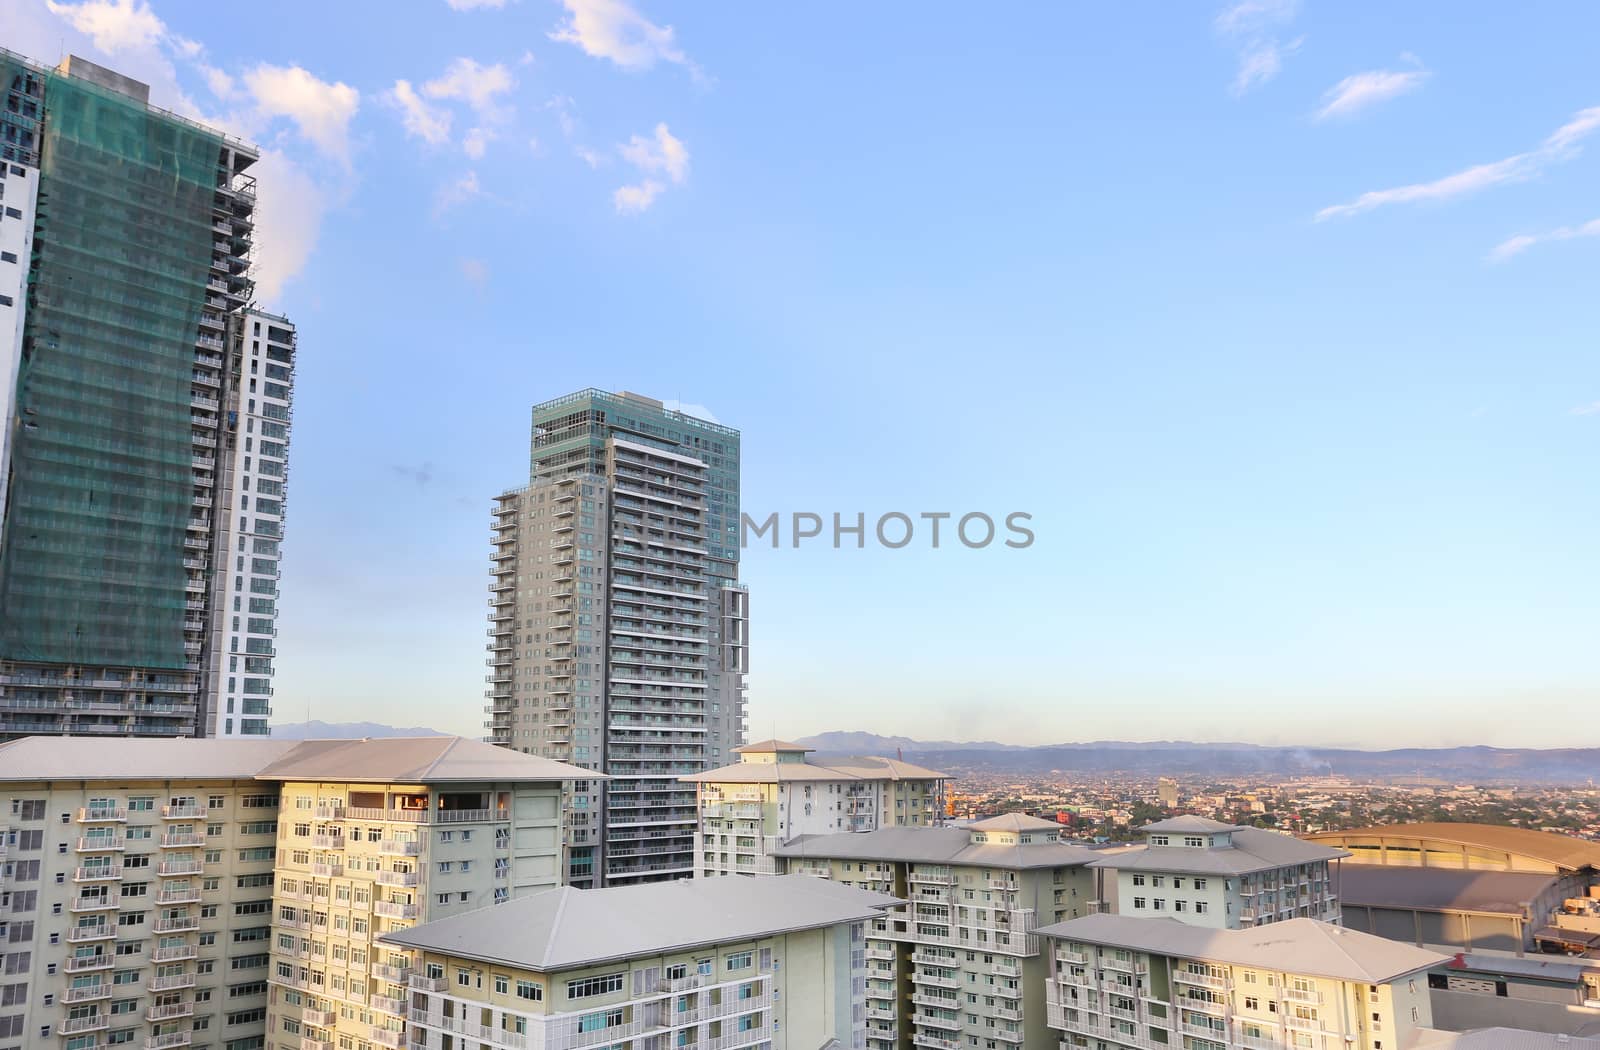 Aerial View of the Skyline of Manila, Philippines by dacasdo